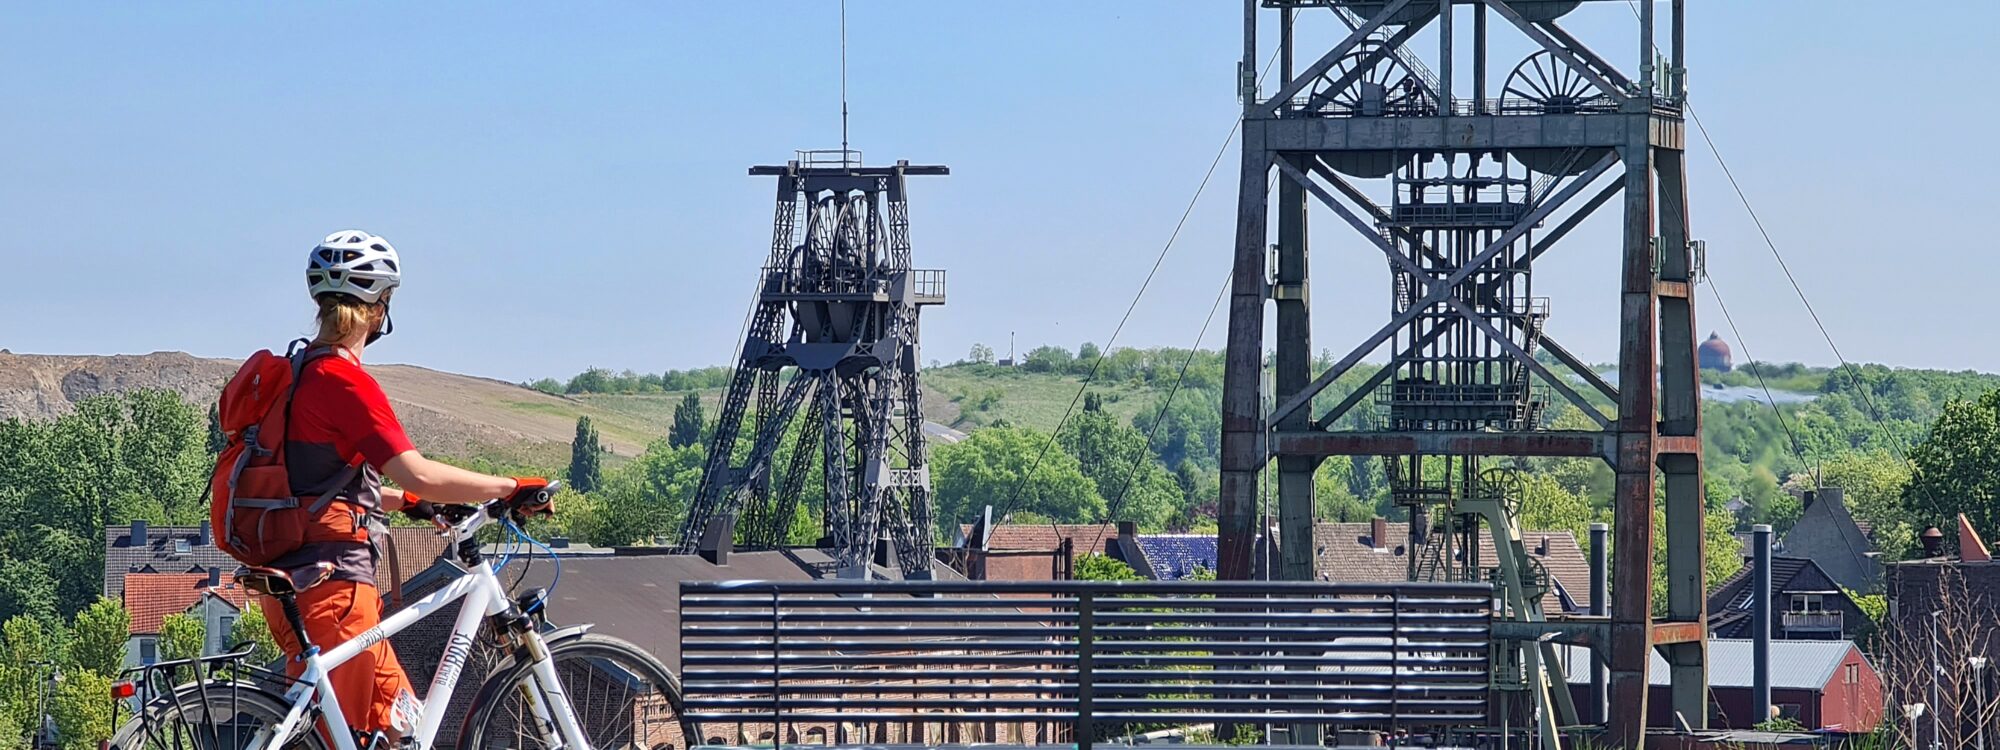 The photo shows a cyclist at the Gneisenau colliery in Dortmund